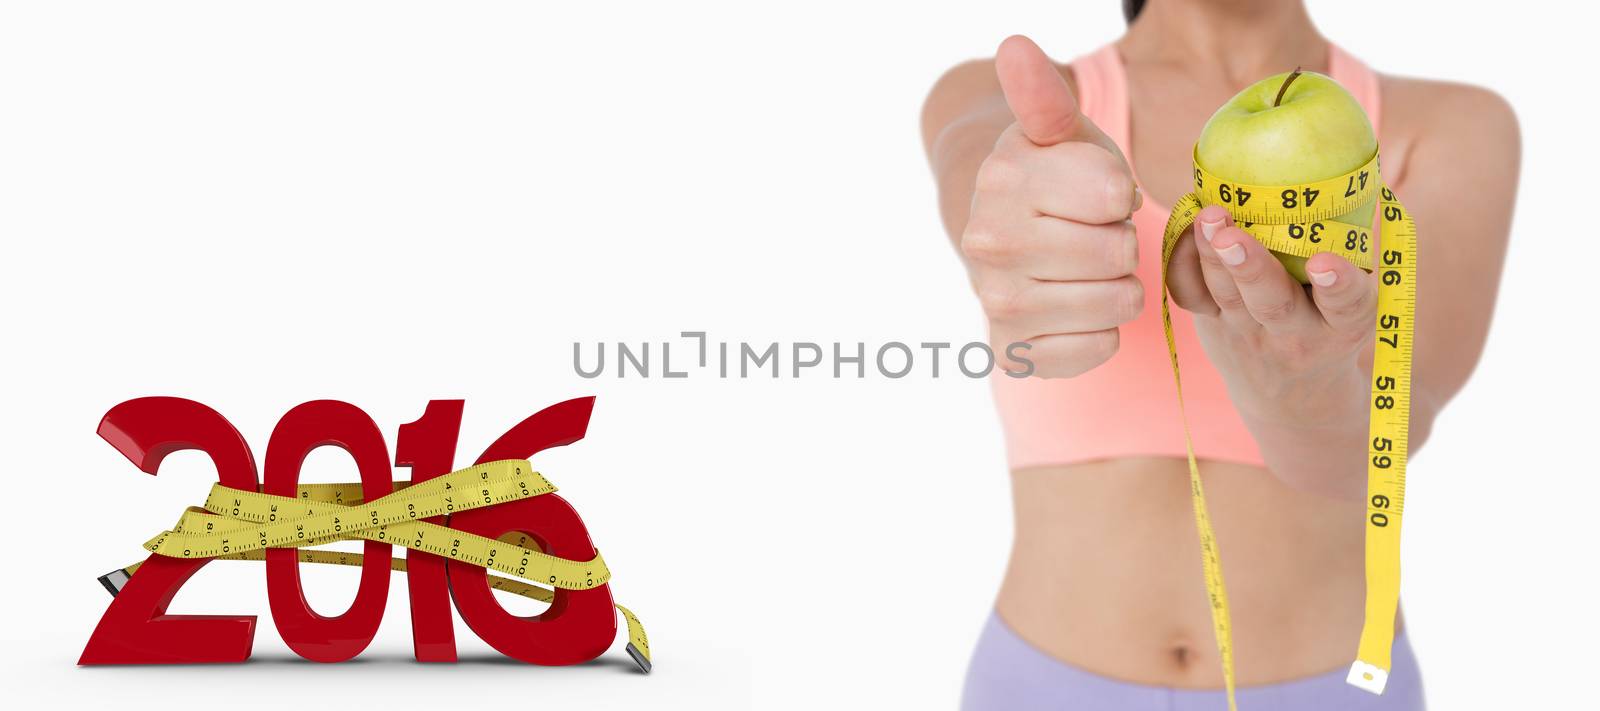 Slim woman holding apple with measuring tape against white background with vignette